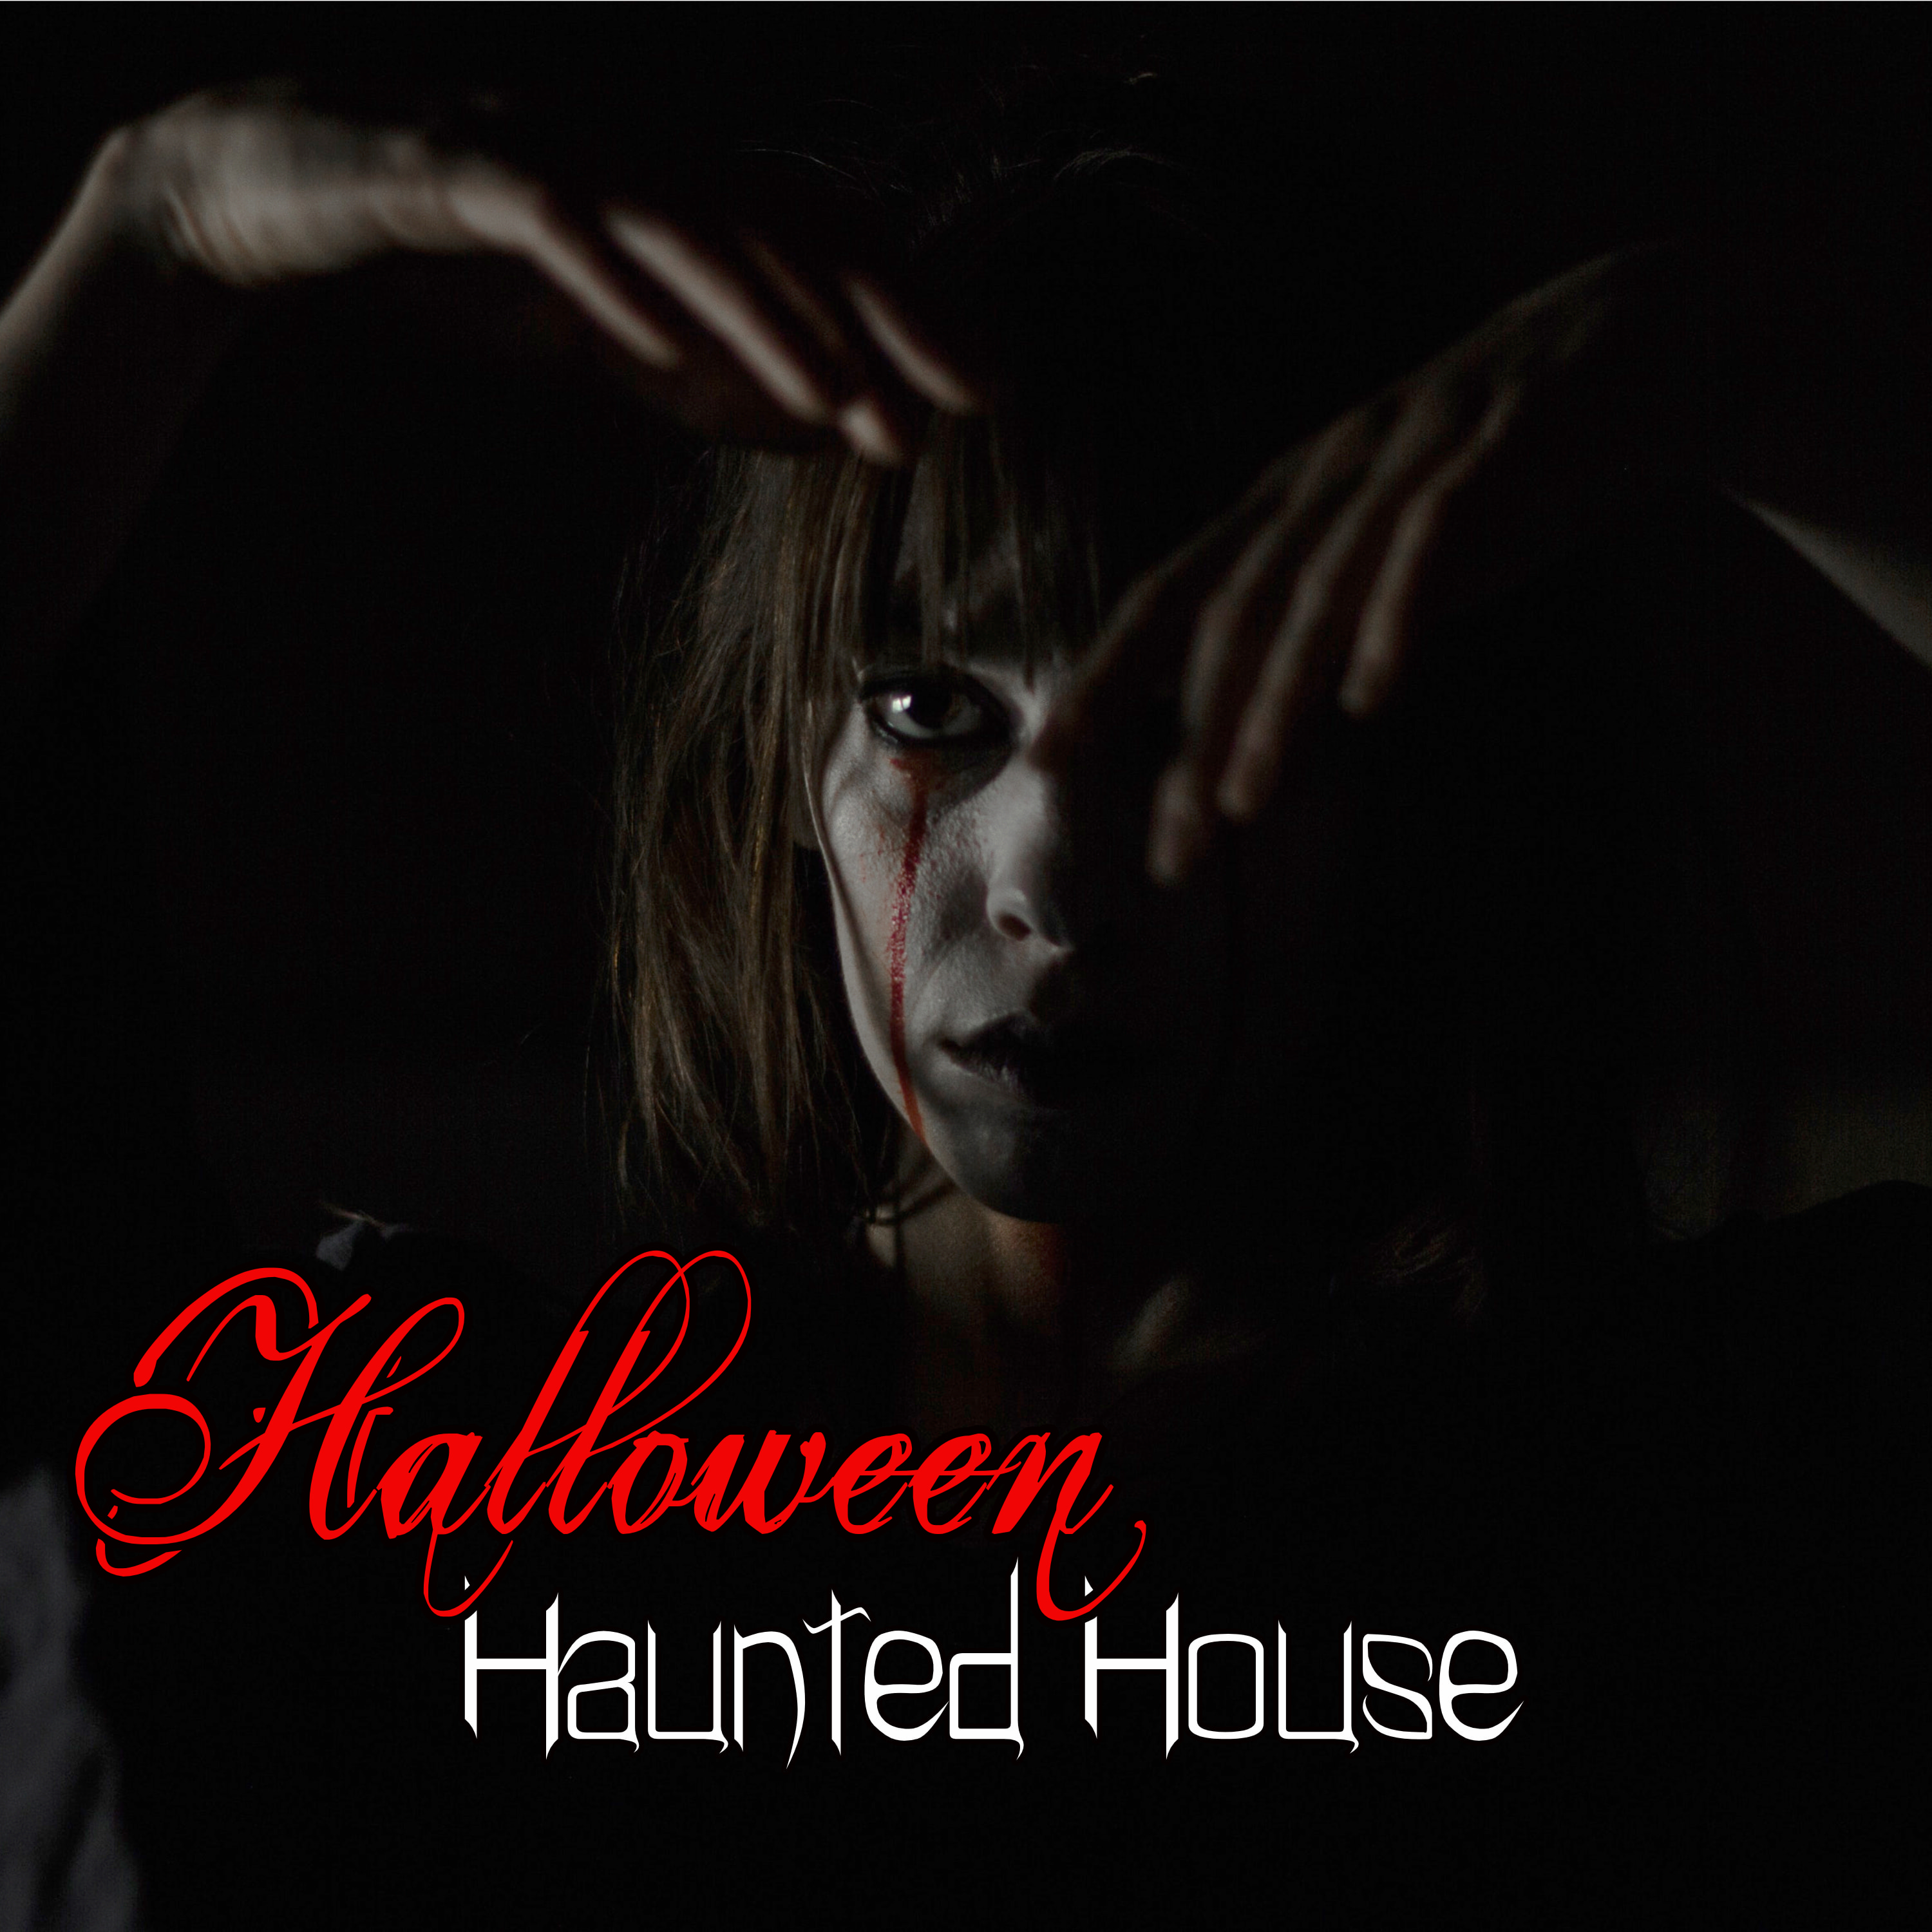 Halloween Haunted House  Halloween Music, Monsters Screaming, Creepy Halloween Sounds on Electronic House Music for 2018 Halloween Party